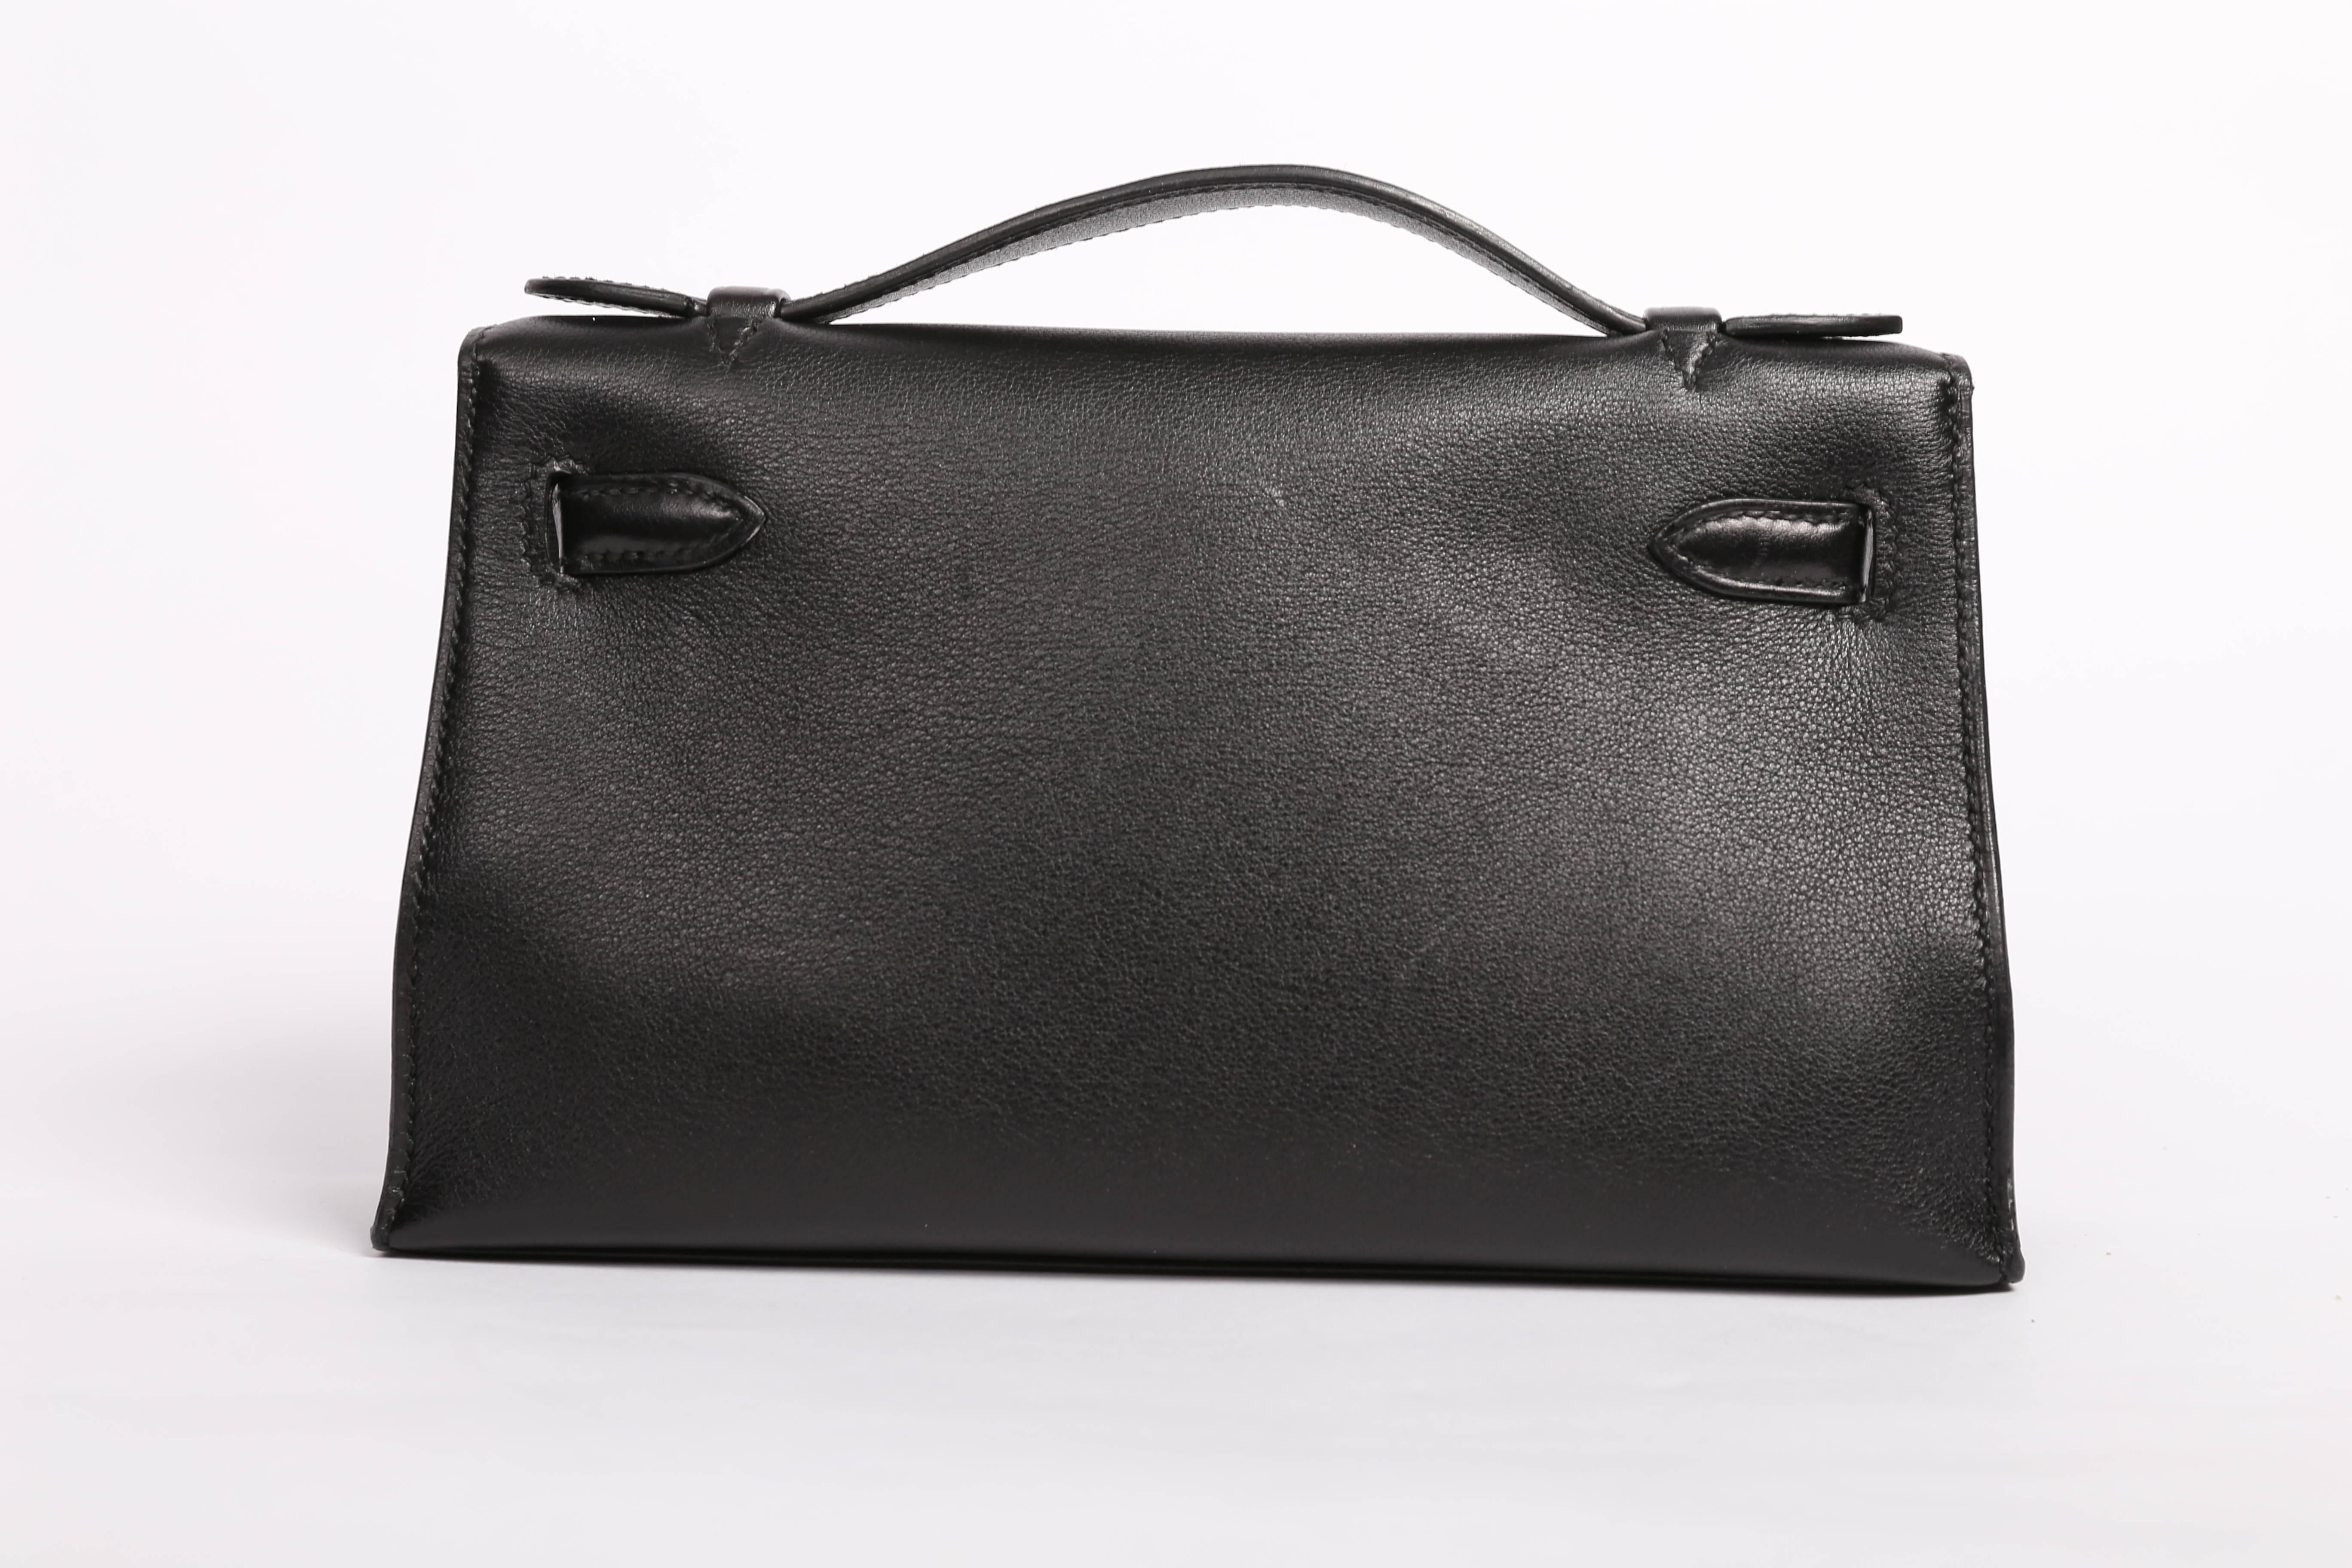 Hermes  Kelly Pochette in black swift leather with palladium hardware.

Kelly Pochette features tonal stitching, a front flap with two straps, toggle closure and single flat handle. The interior is lined in black chevre and with one flat interior